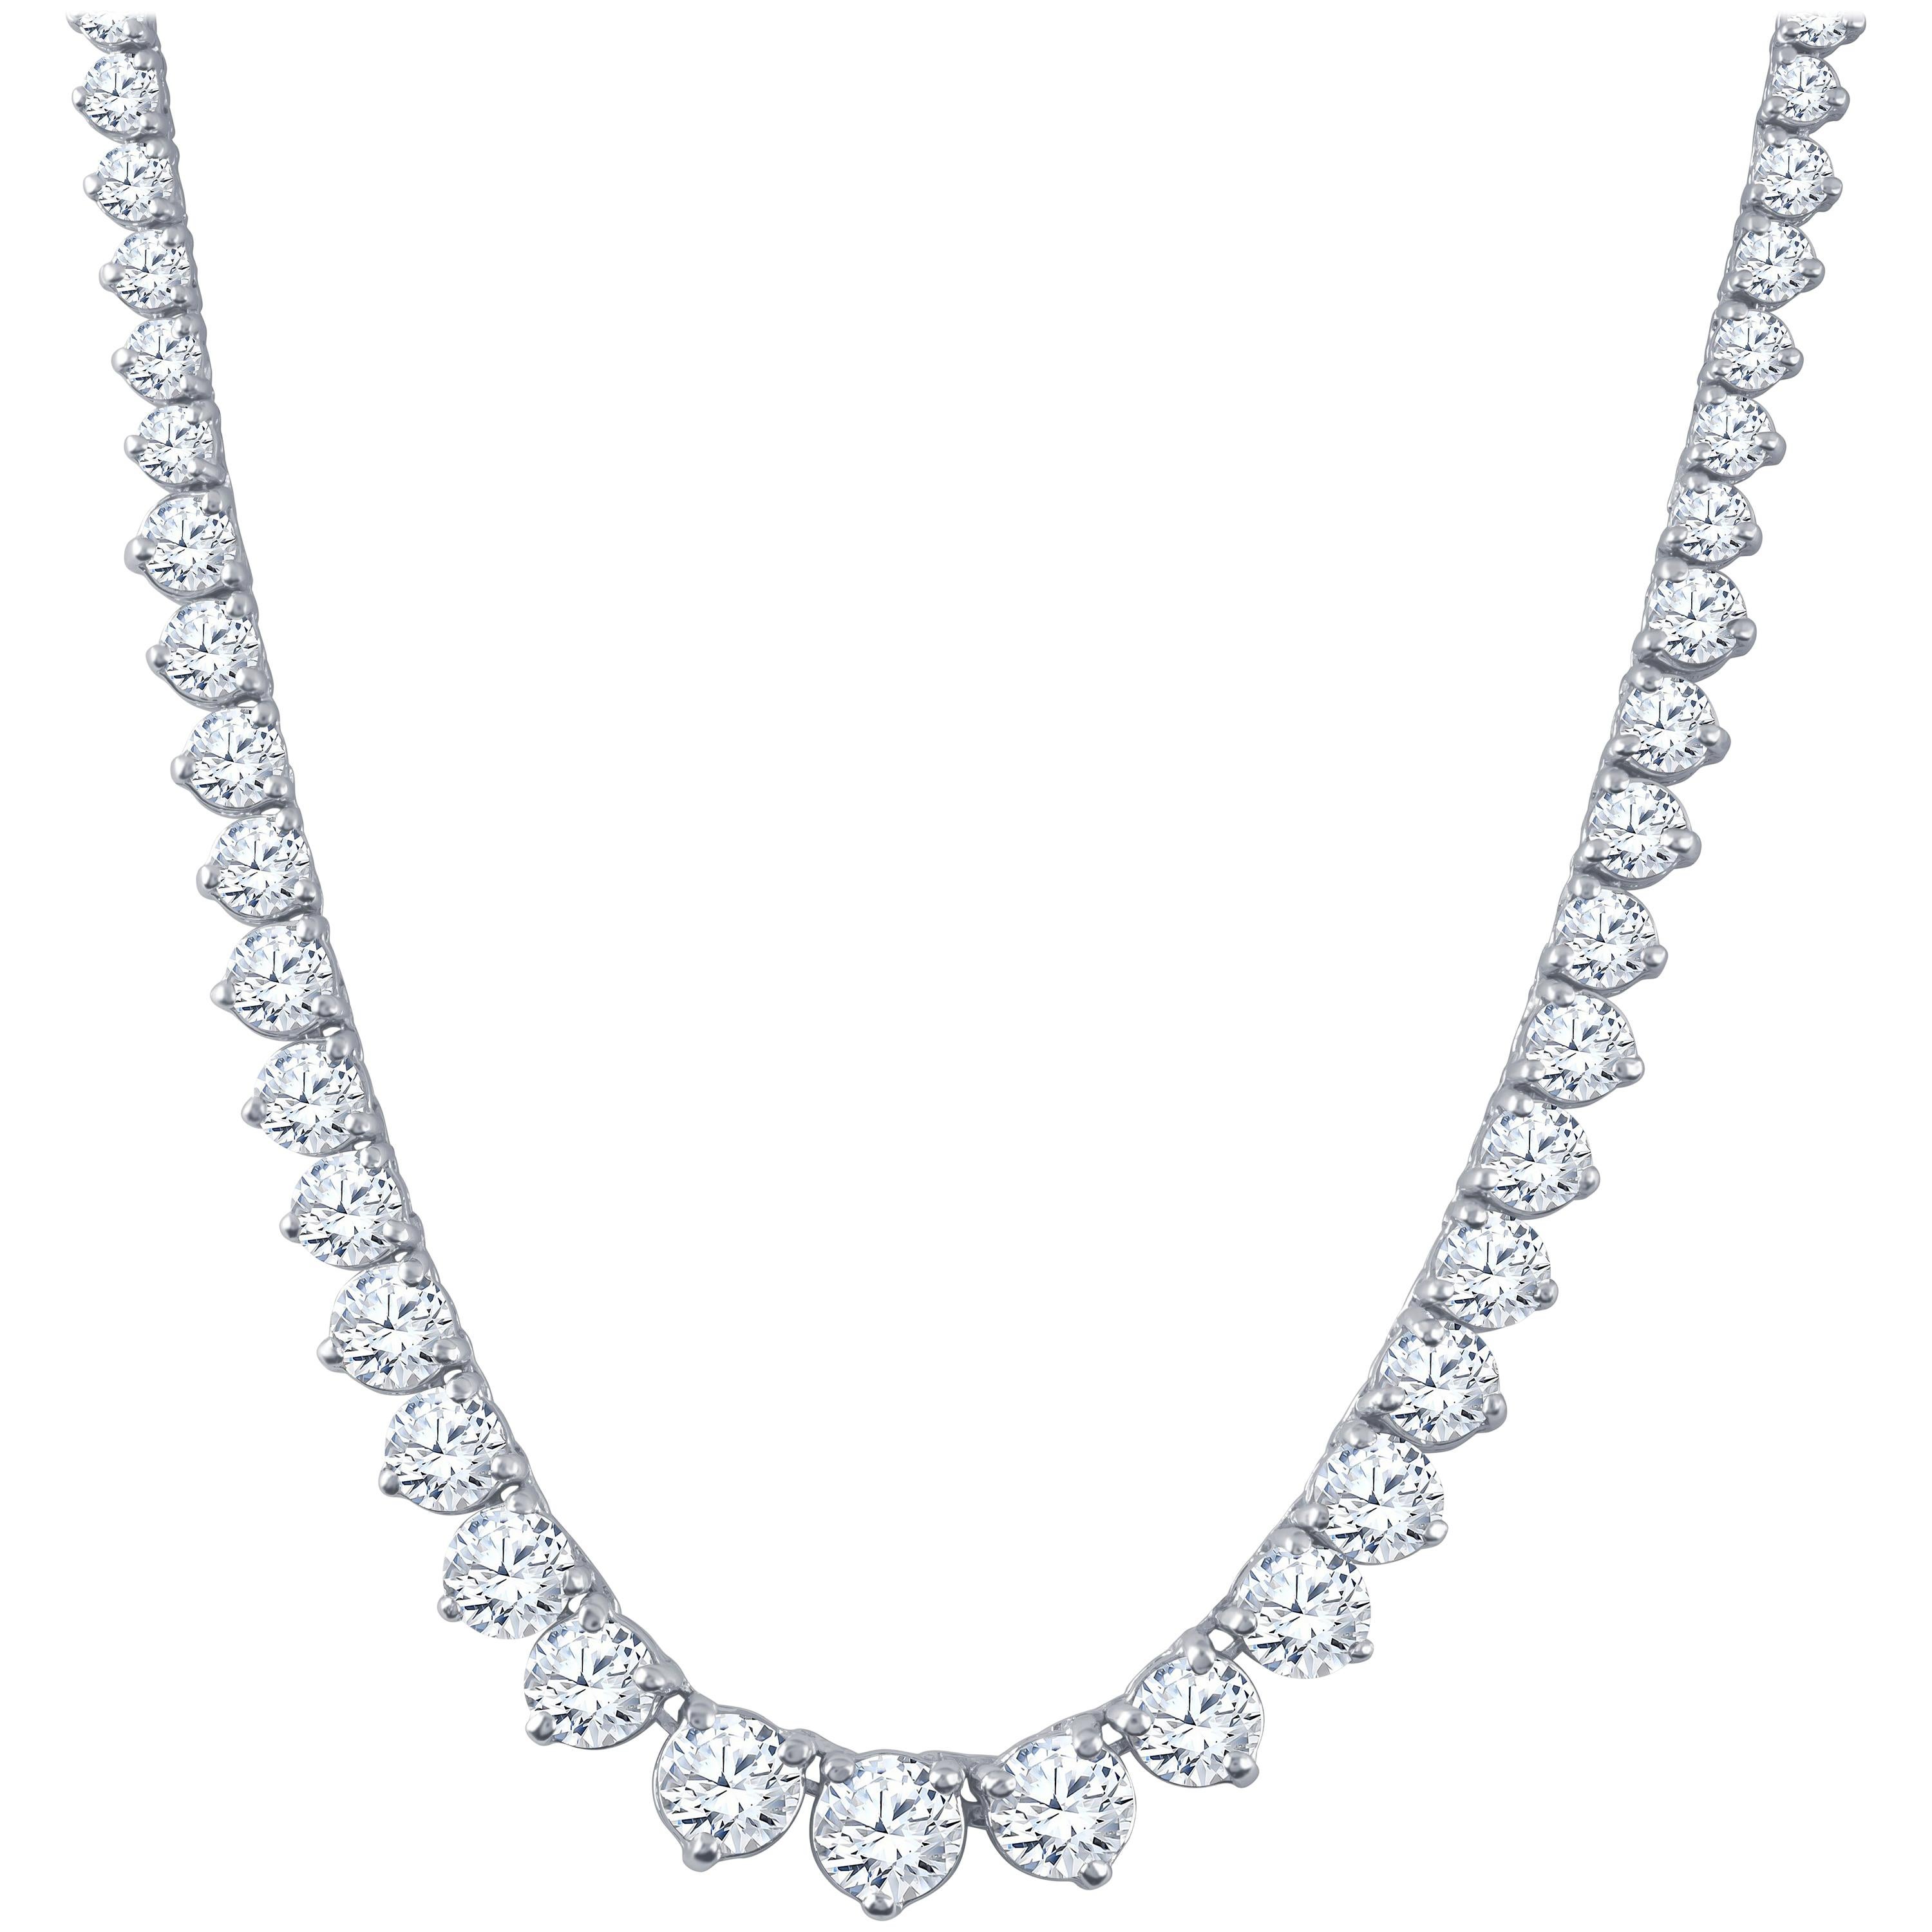 Rivera Necklace with 17.61 Carat Total Weight in Round Diamonds